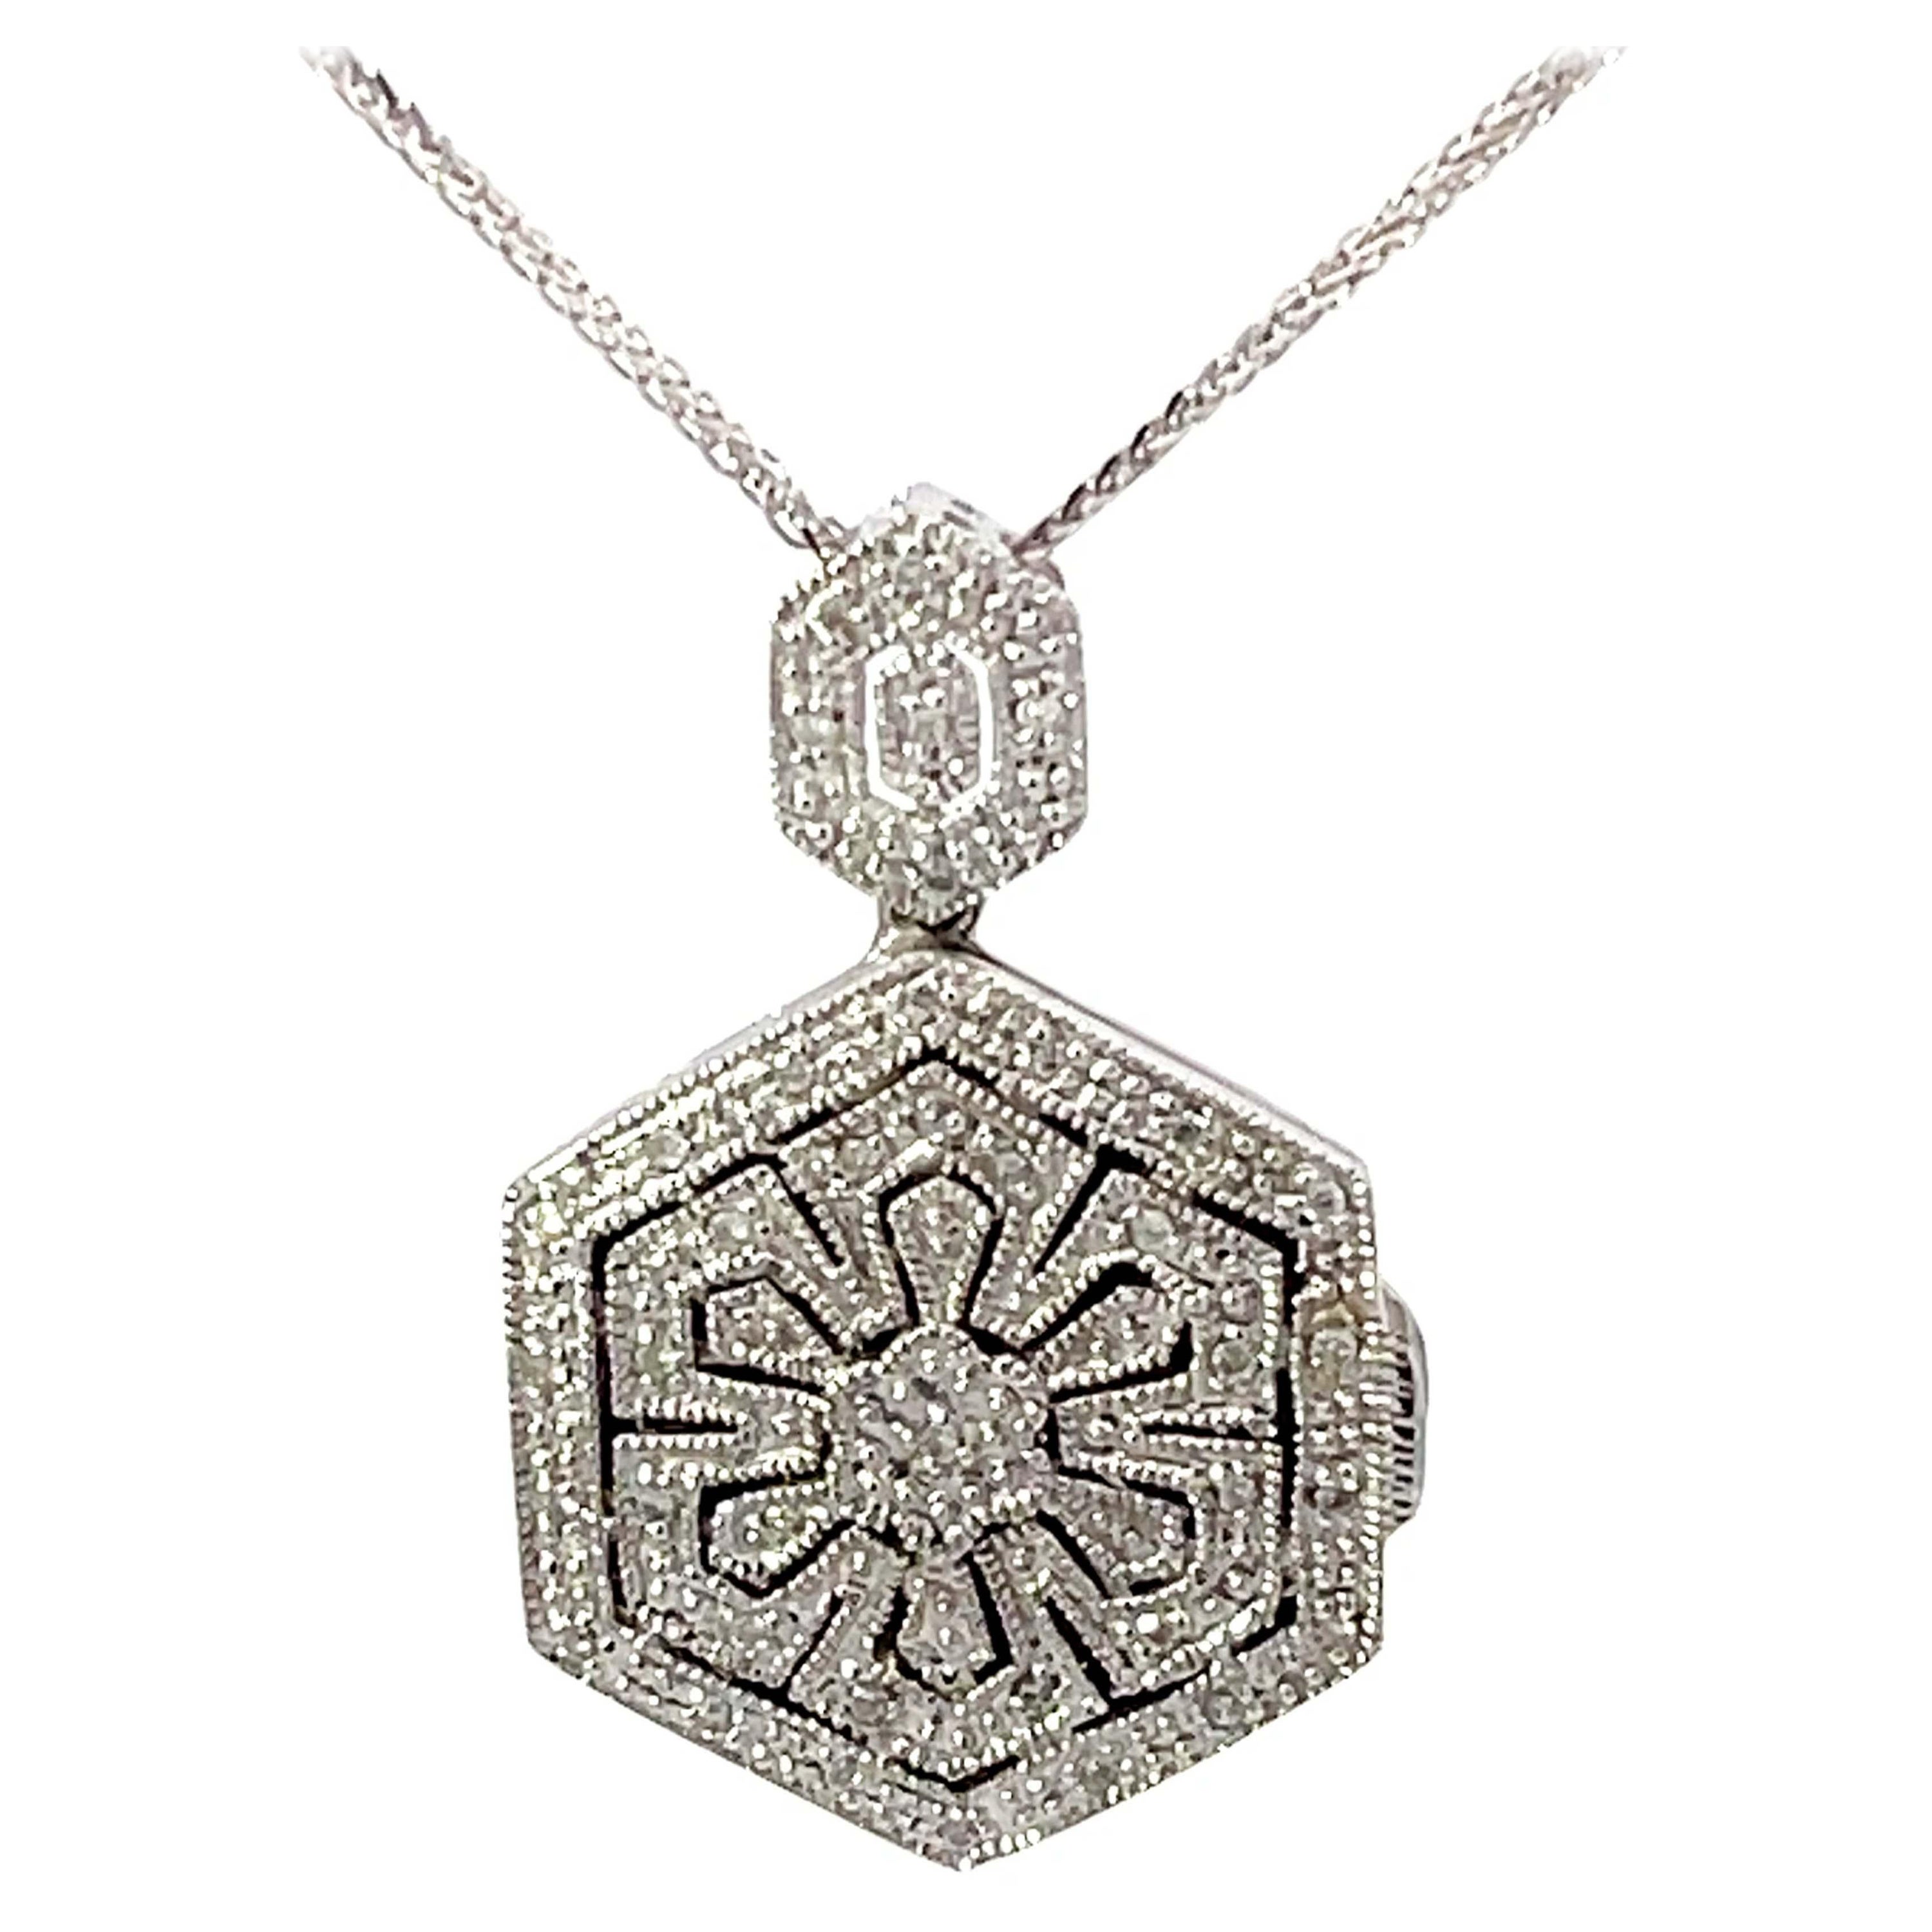 Solid 14K White Gold Hexagon Shaped Diamond Pendant and Chain